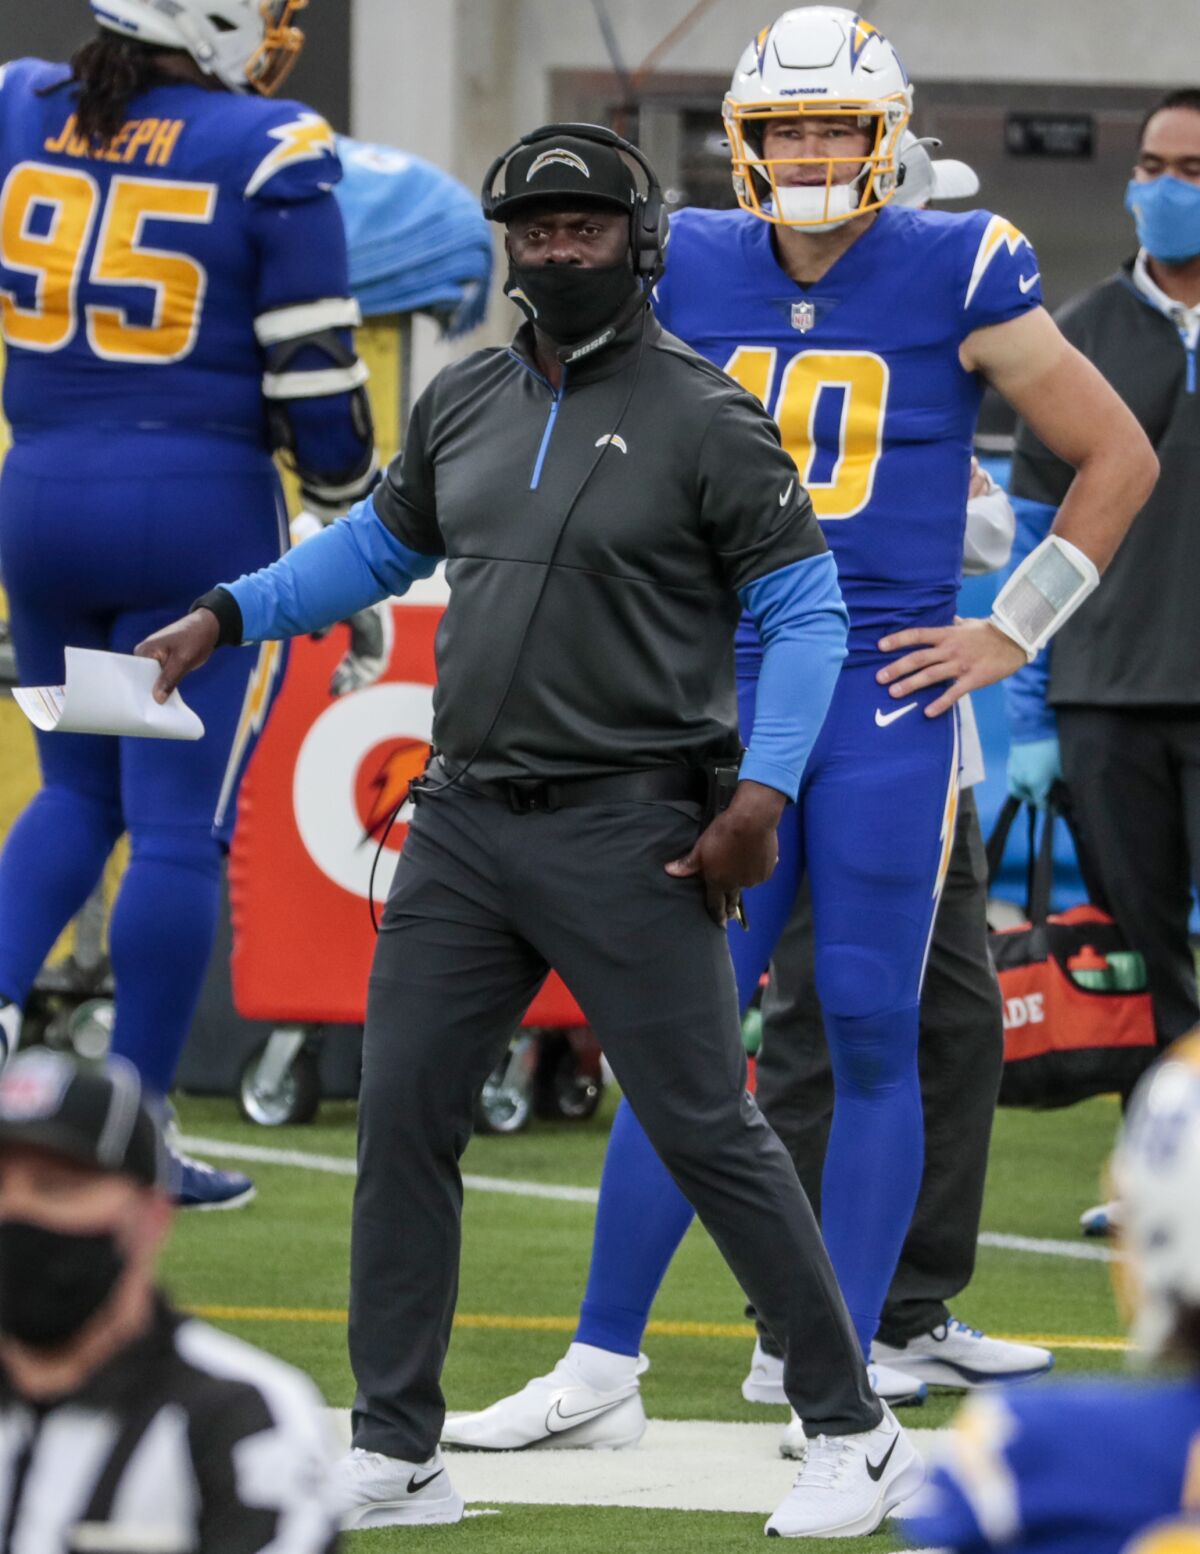  Chargers coach Anthony Lynn looks on near the end of the first half.